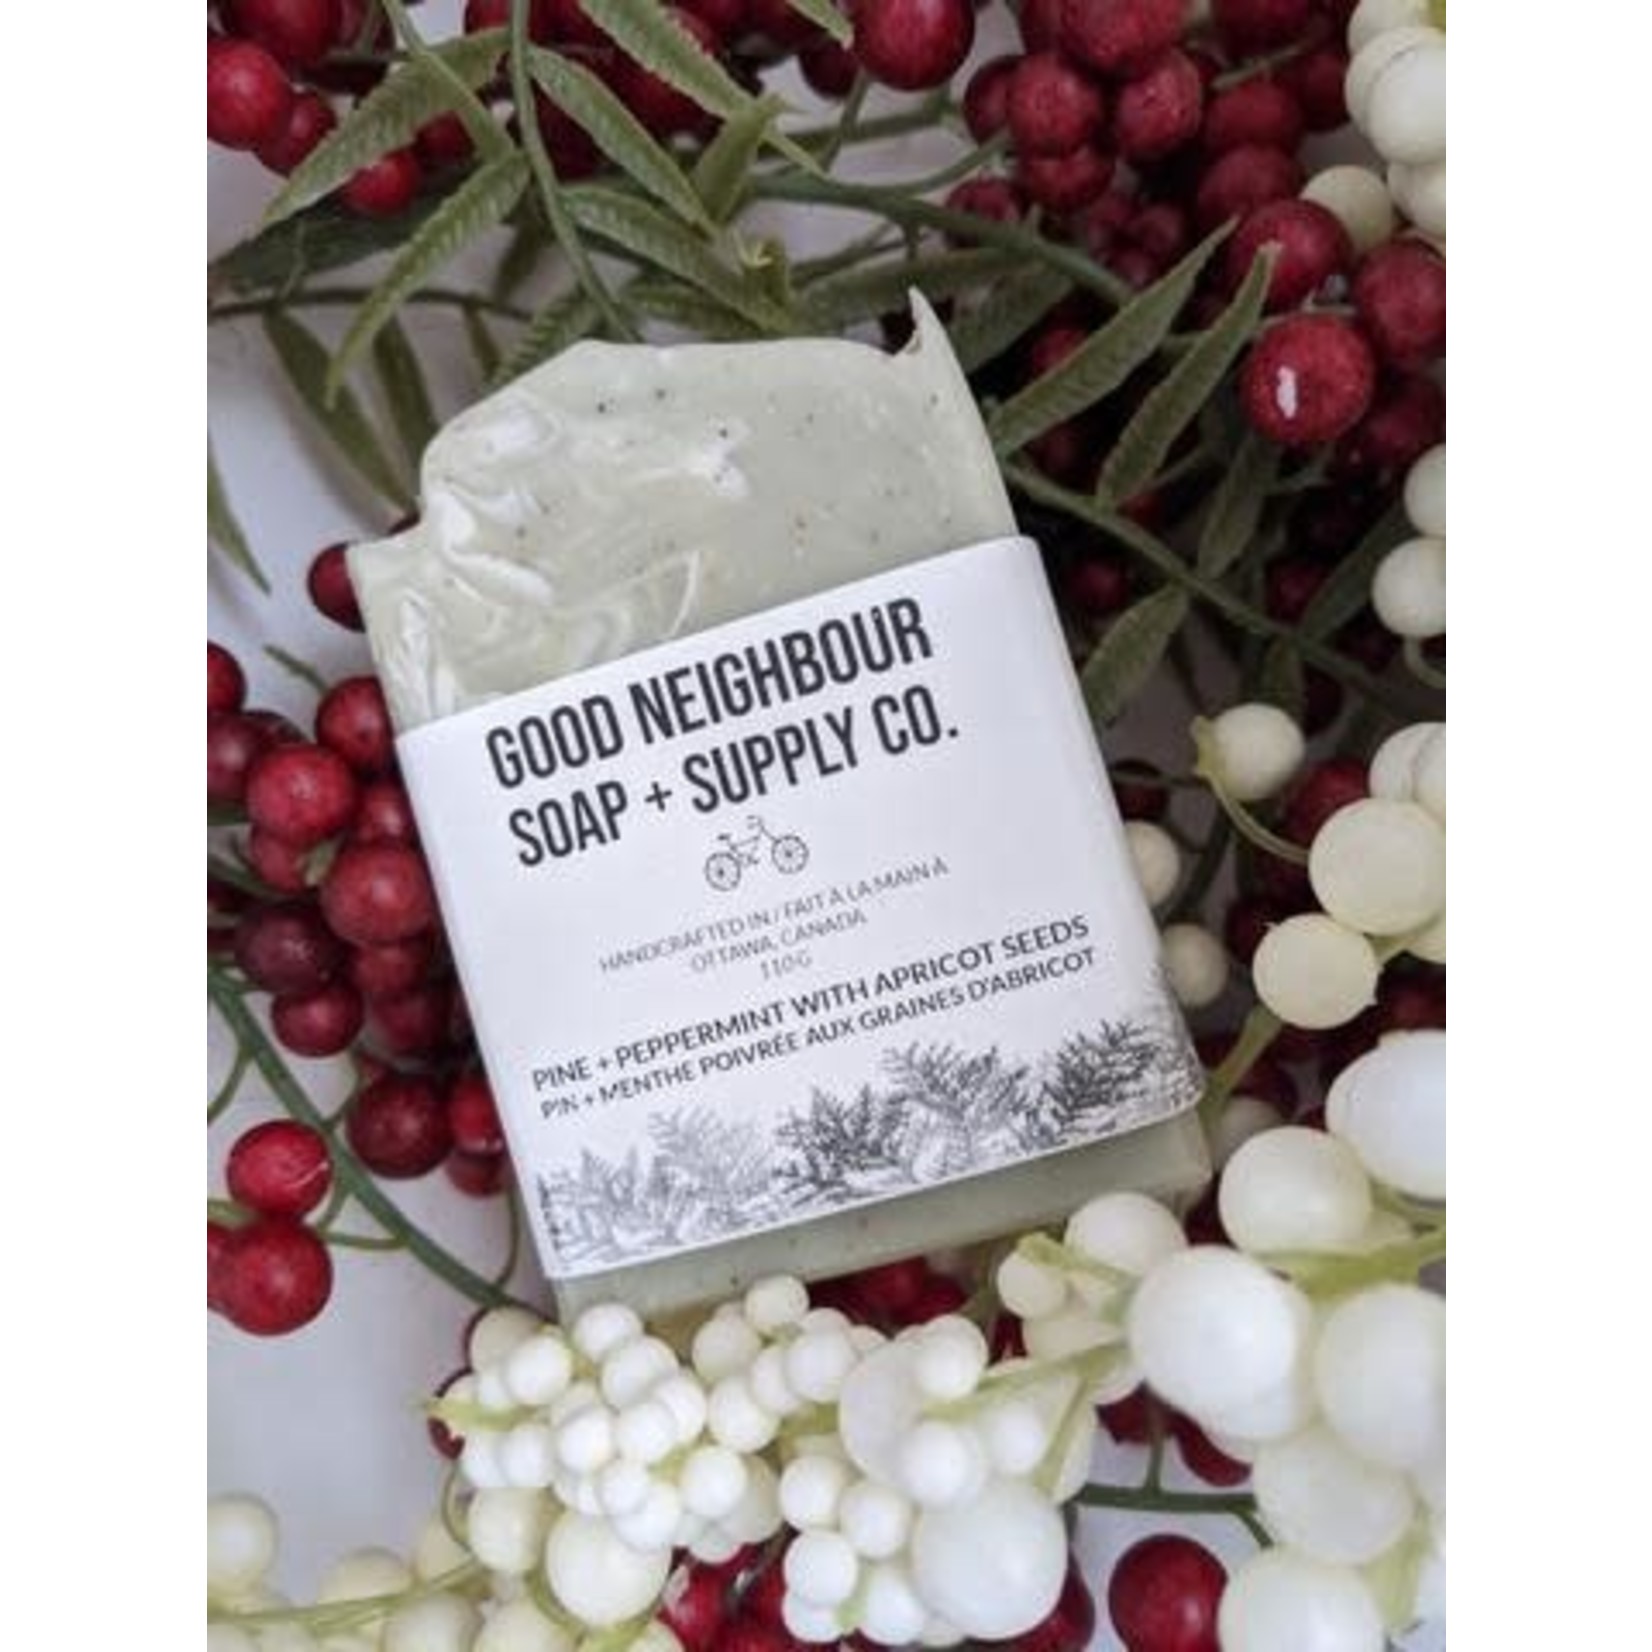 Good Neighbour Soap - Peppermint and Pine